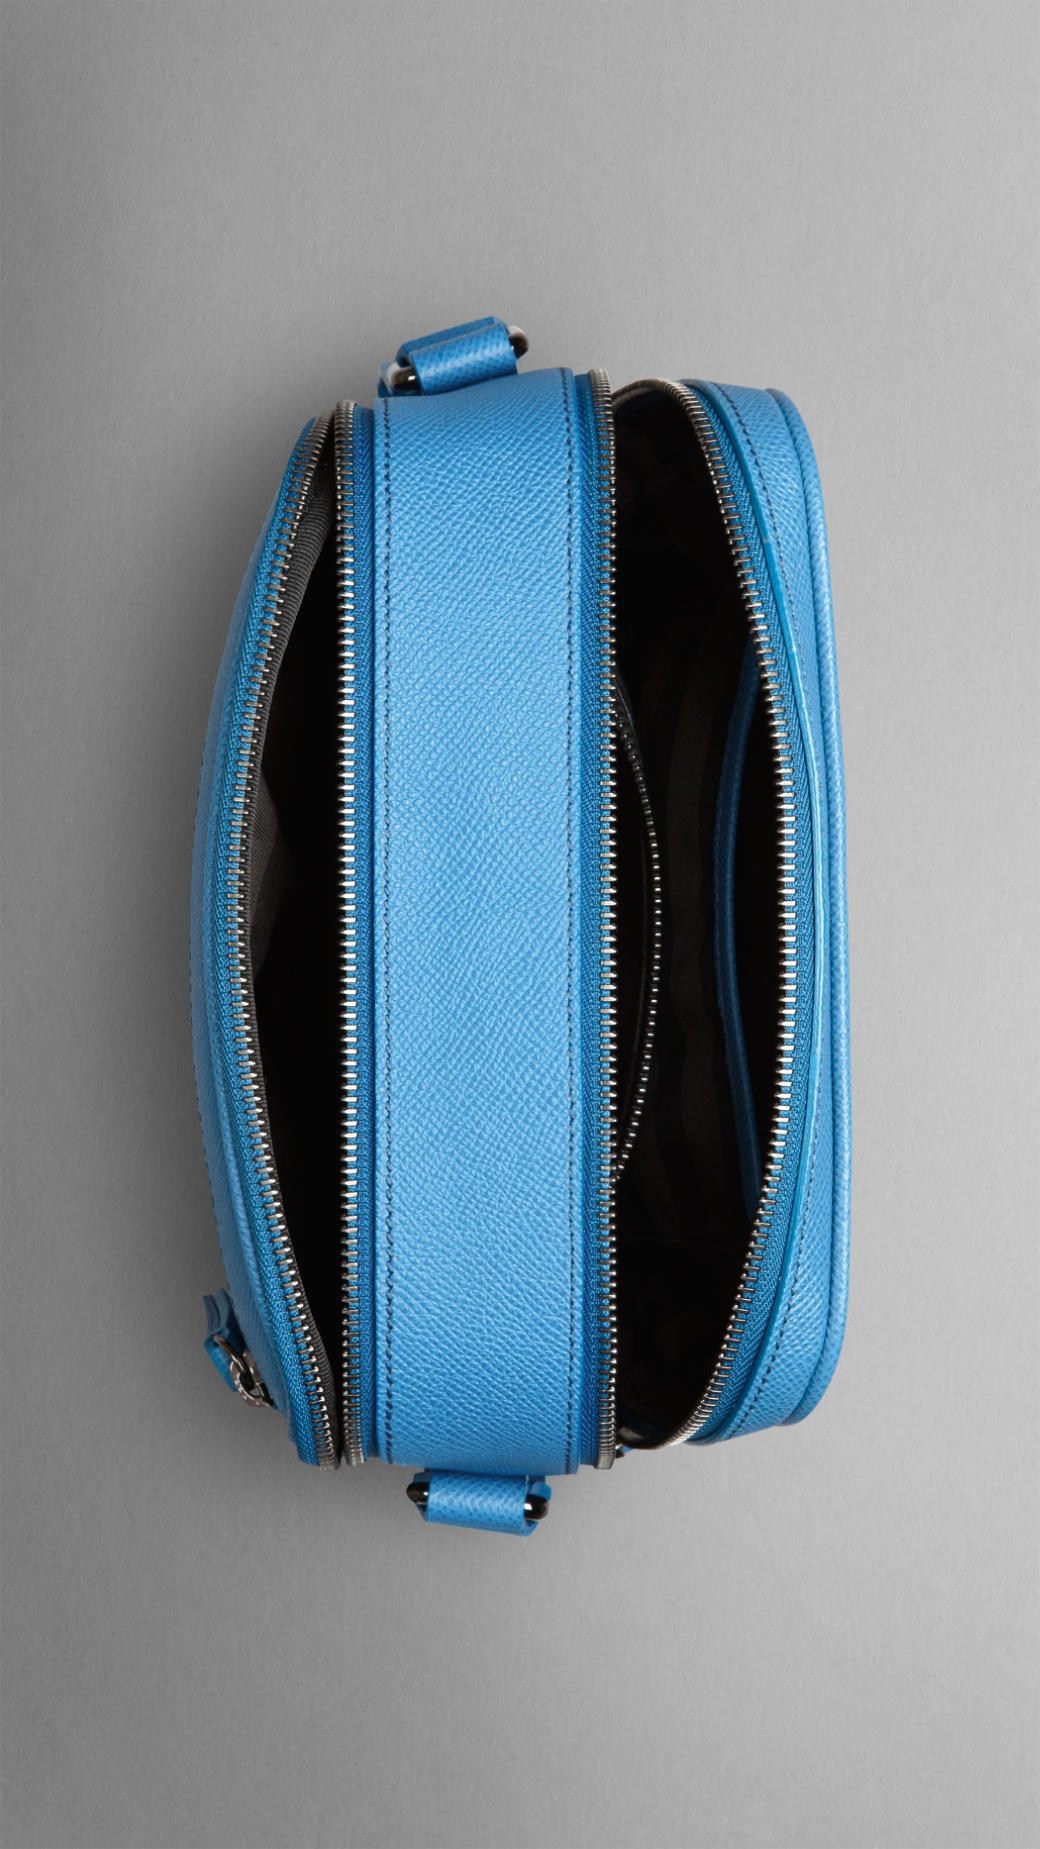 Burberry London Leather Crossbody Bag in Blue for Men - Lyst